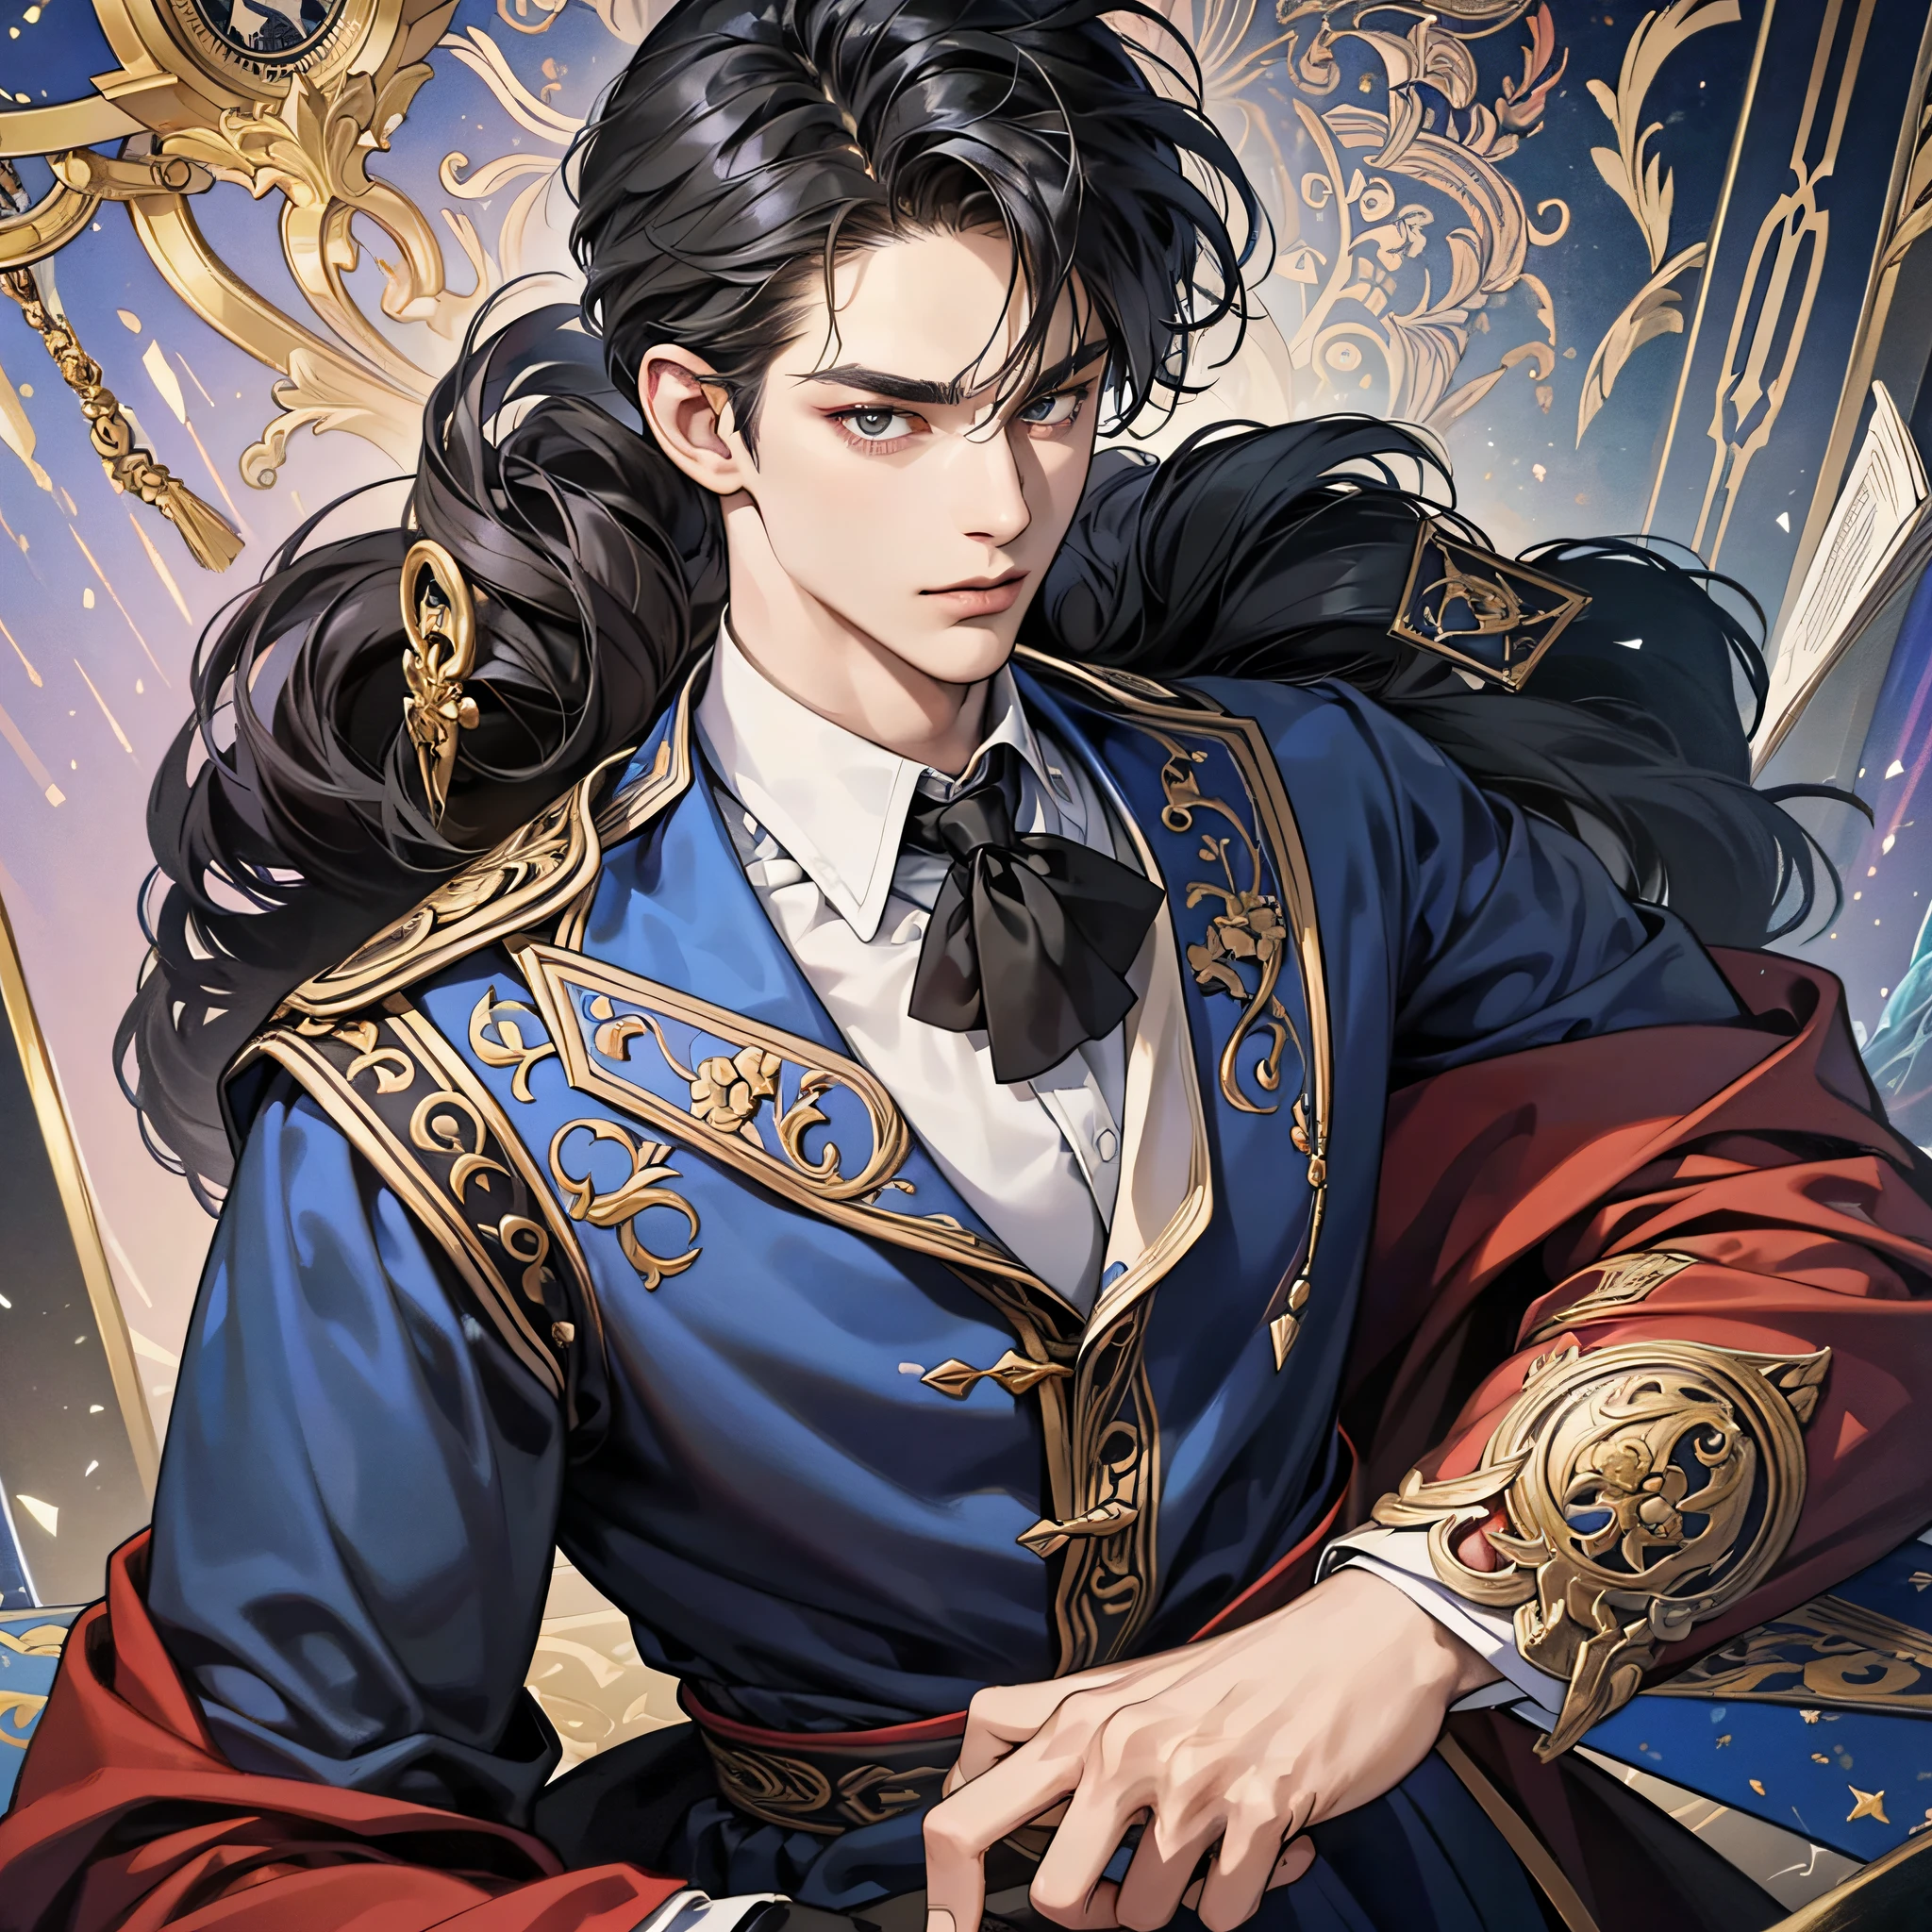 (absurd, high resolution, ultra detailed, 8K, Manhwua Art), 1 man, adult, handsome, tall muscular guy, broad shoulders, finely detailed eyes and detailed face, formally
dress, detailed clothing, black hair, black eyes, the fool \tarot\, bard, clown, Symbolism, Visual arts, Occult, Universal, Vision cast, Philosophical, Iconography, Numerology, Popularity, Artistic